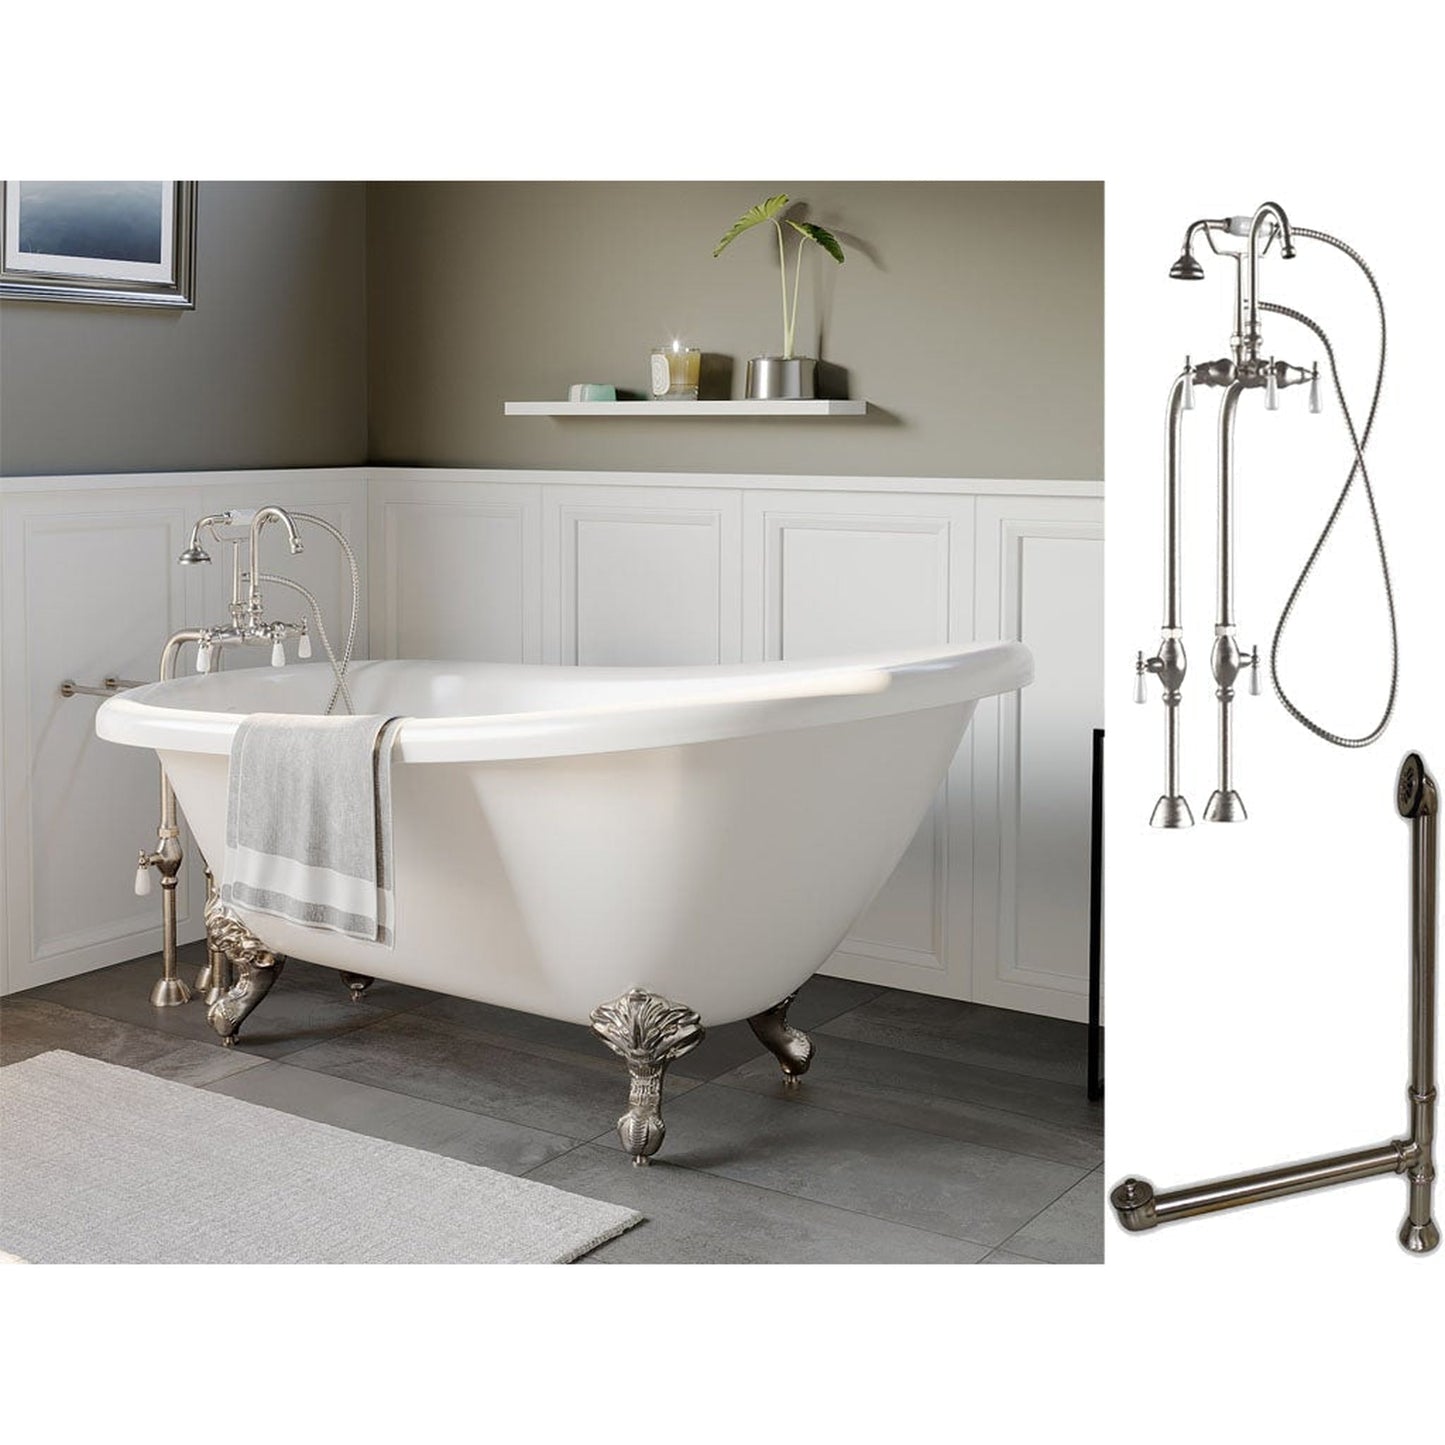 Cambridge Plumbing 61" White Acrylic Single Slipper Clawfeet Bathtub With No Deck Holes And Complete Plumbing Package Including Freestanding English Telephone Gooseneck Faucet, Supply Lines, Drain And Overflow Assembly In Brushed Nickel